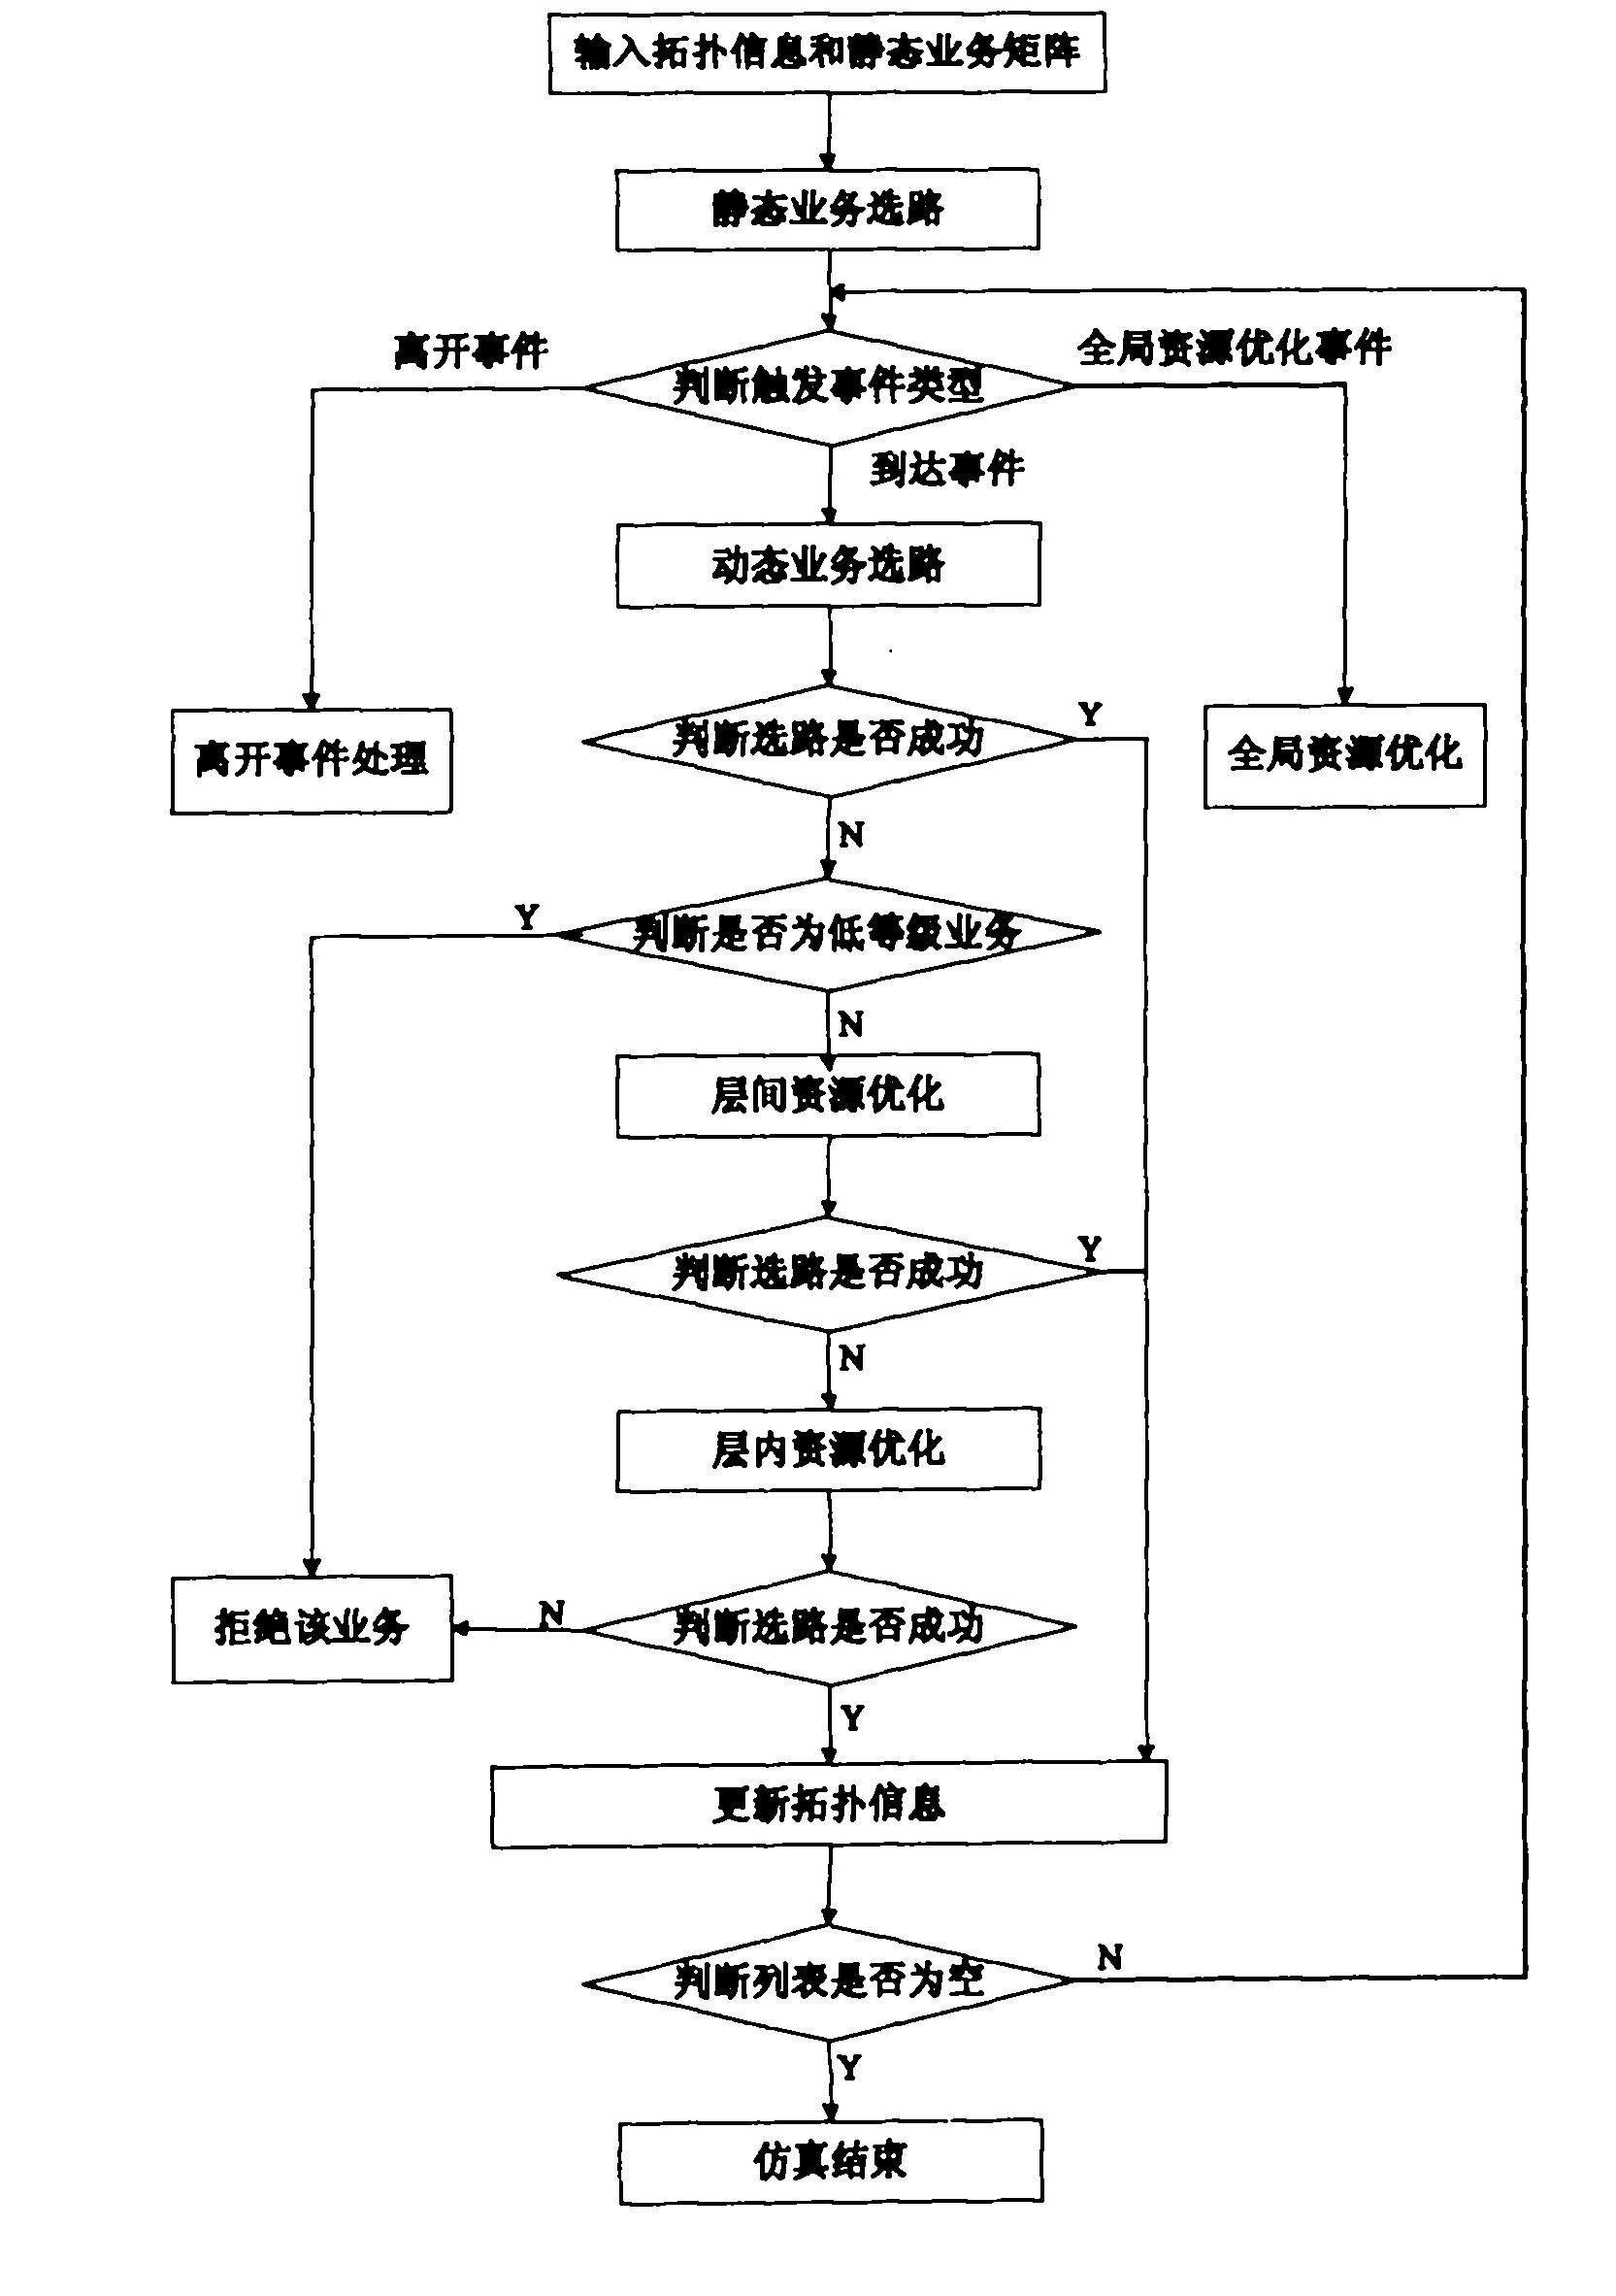 Method for optimizing resources of static-dynamic mixed service in three-layer network